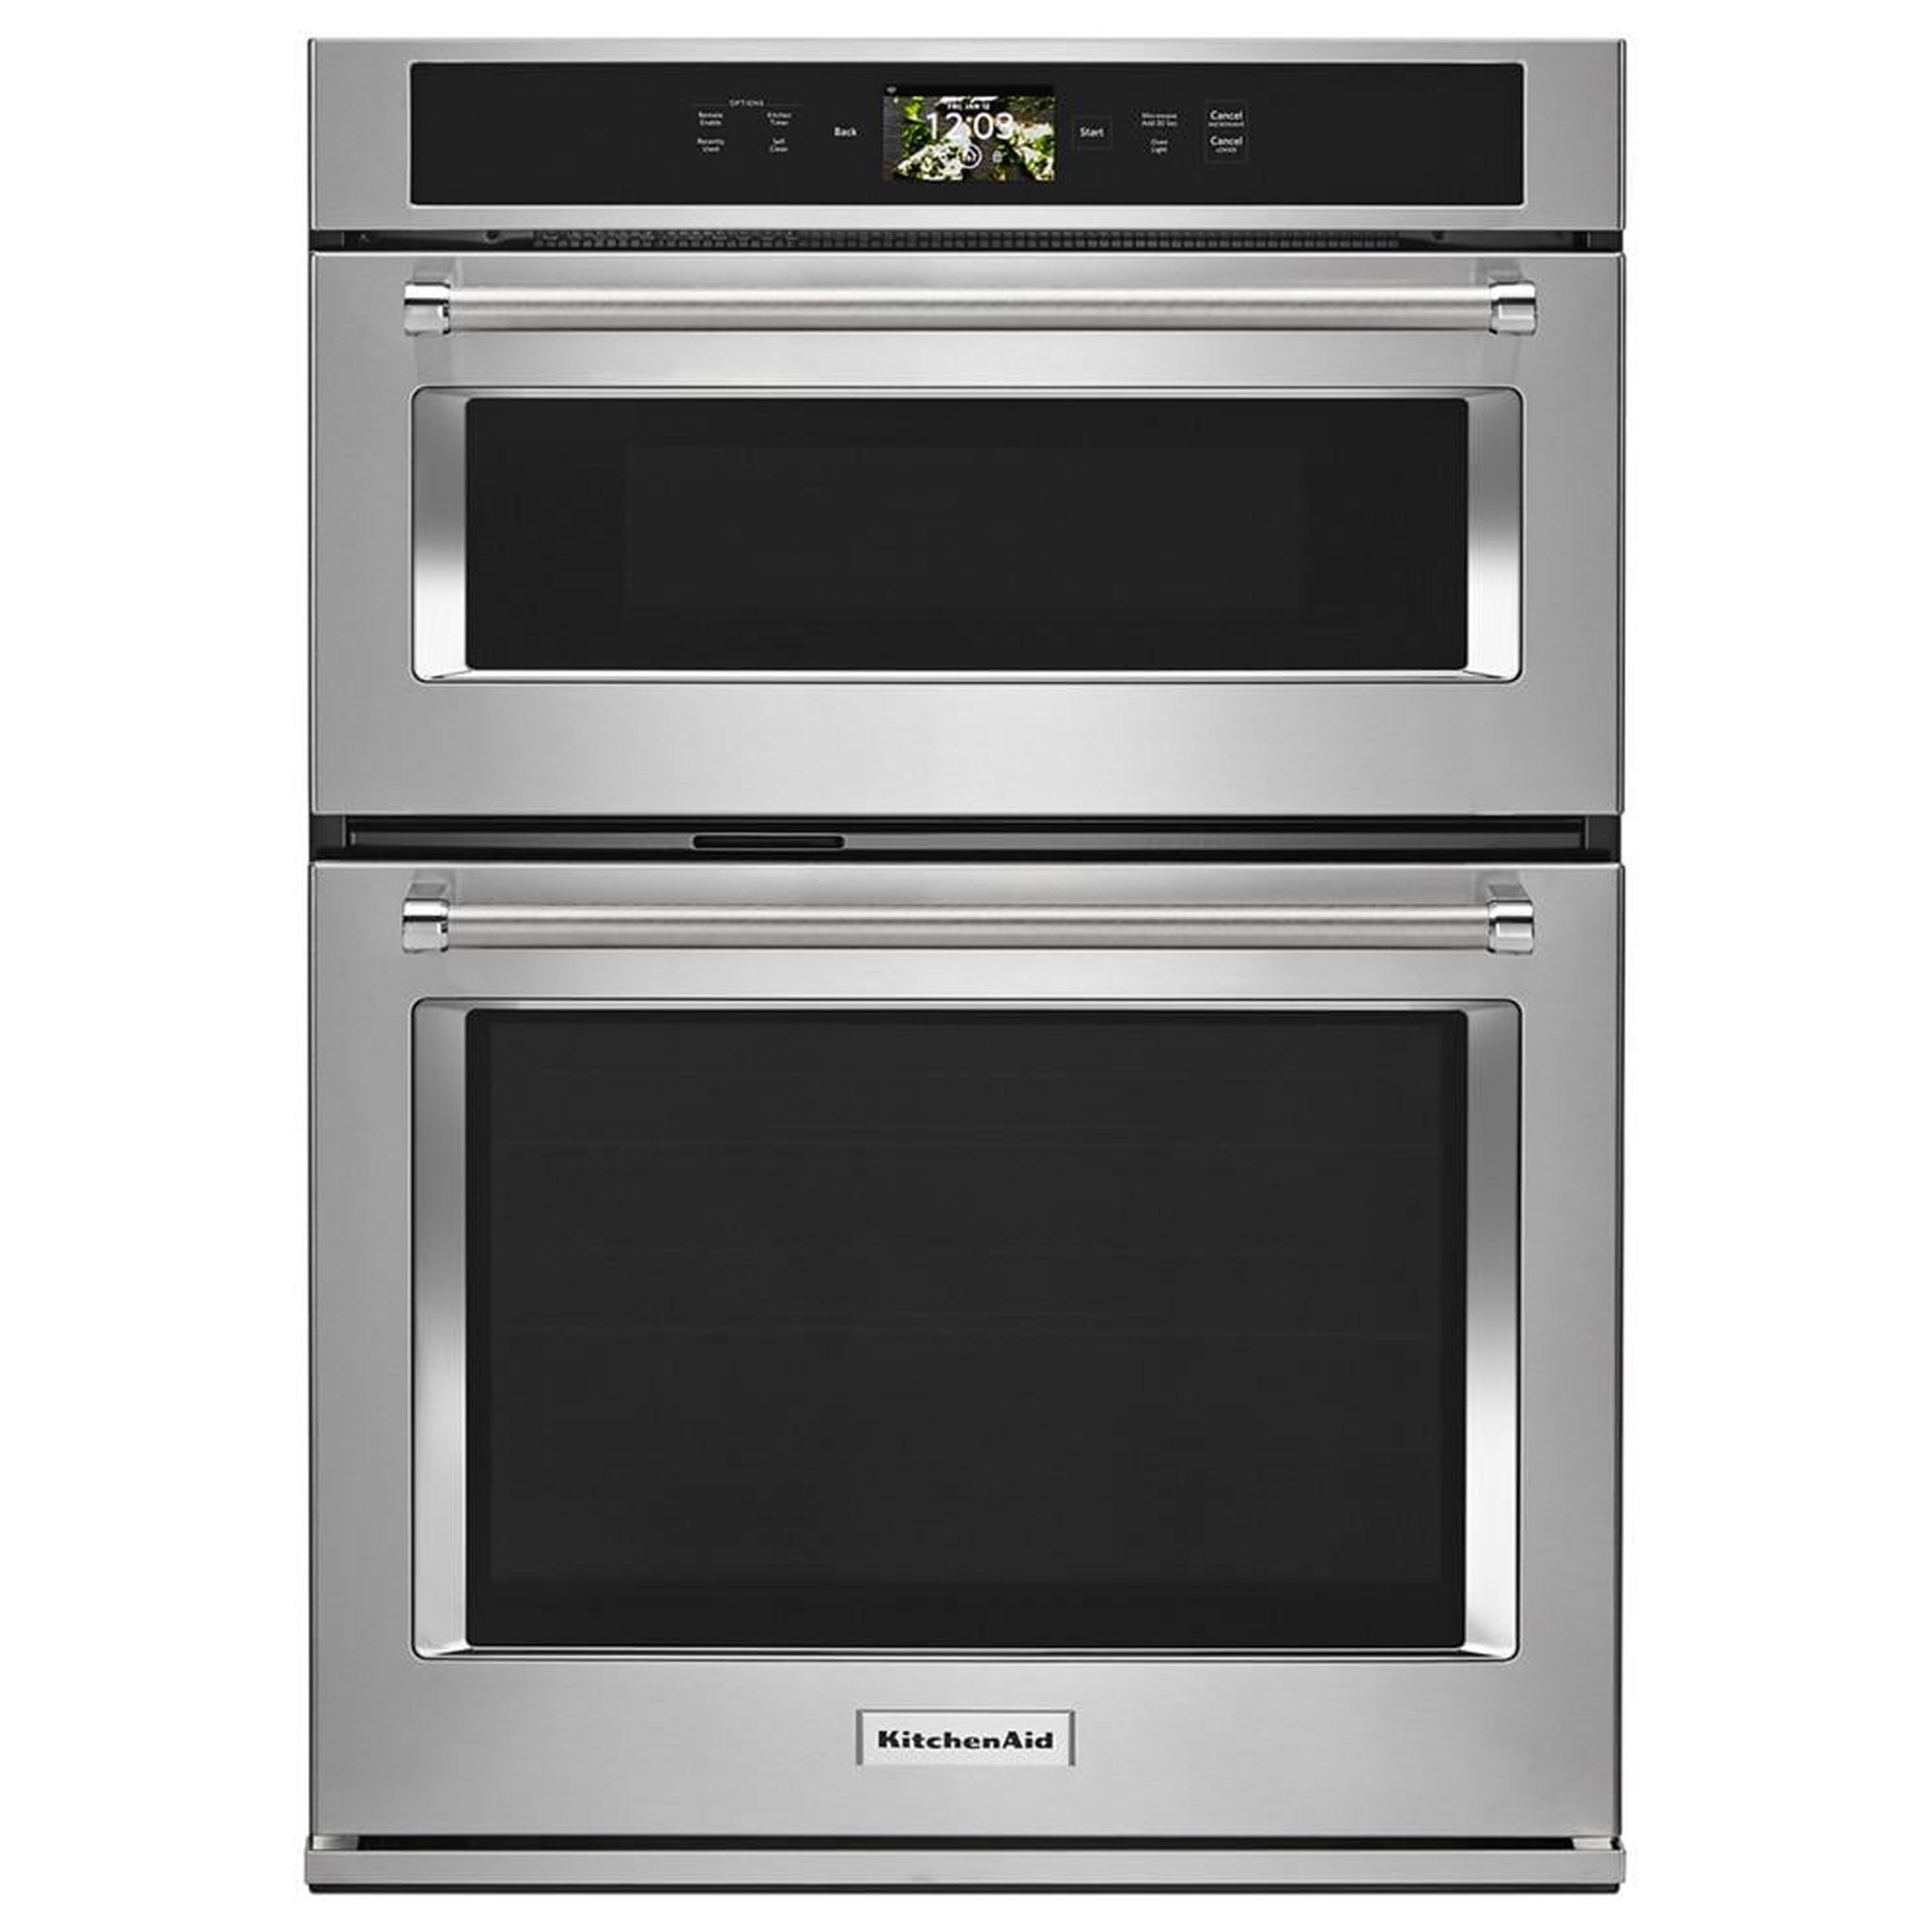 KITCHENAID 30'' Electric Double Oven Convection Range SS - KFED500ESS